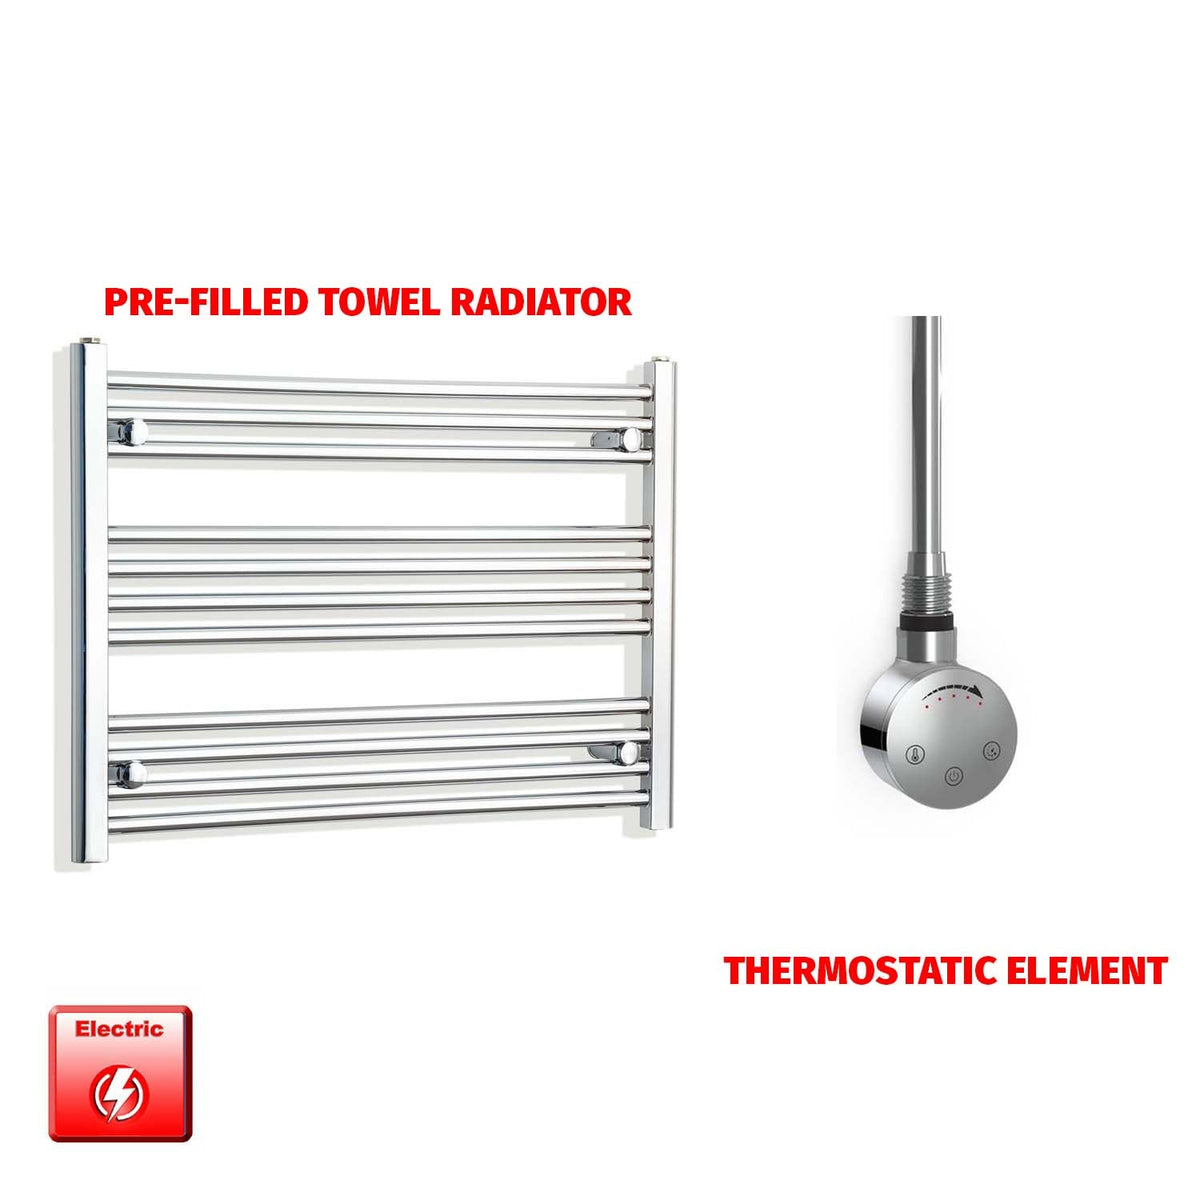 600mm High 800mm Wide Pre-Filled Electric Heated Towel Rail Radiator Straight Chrome SMR Thermostatic element no timer